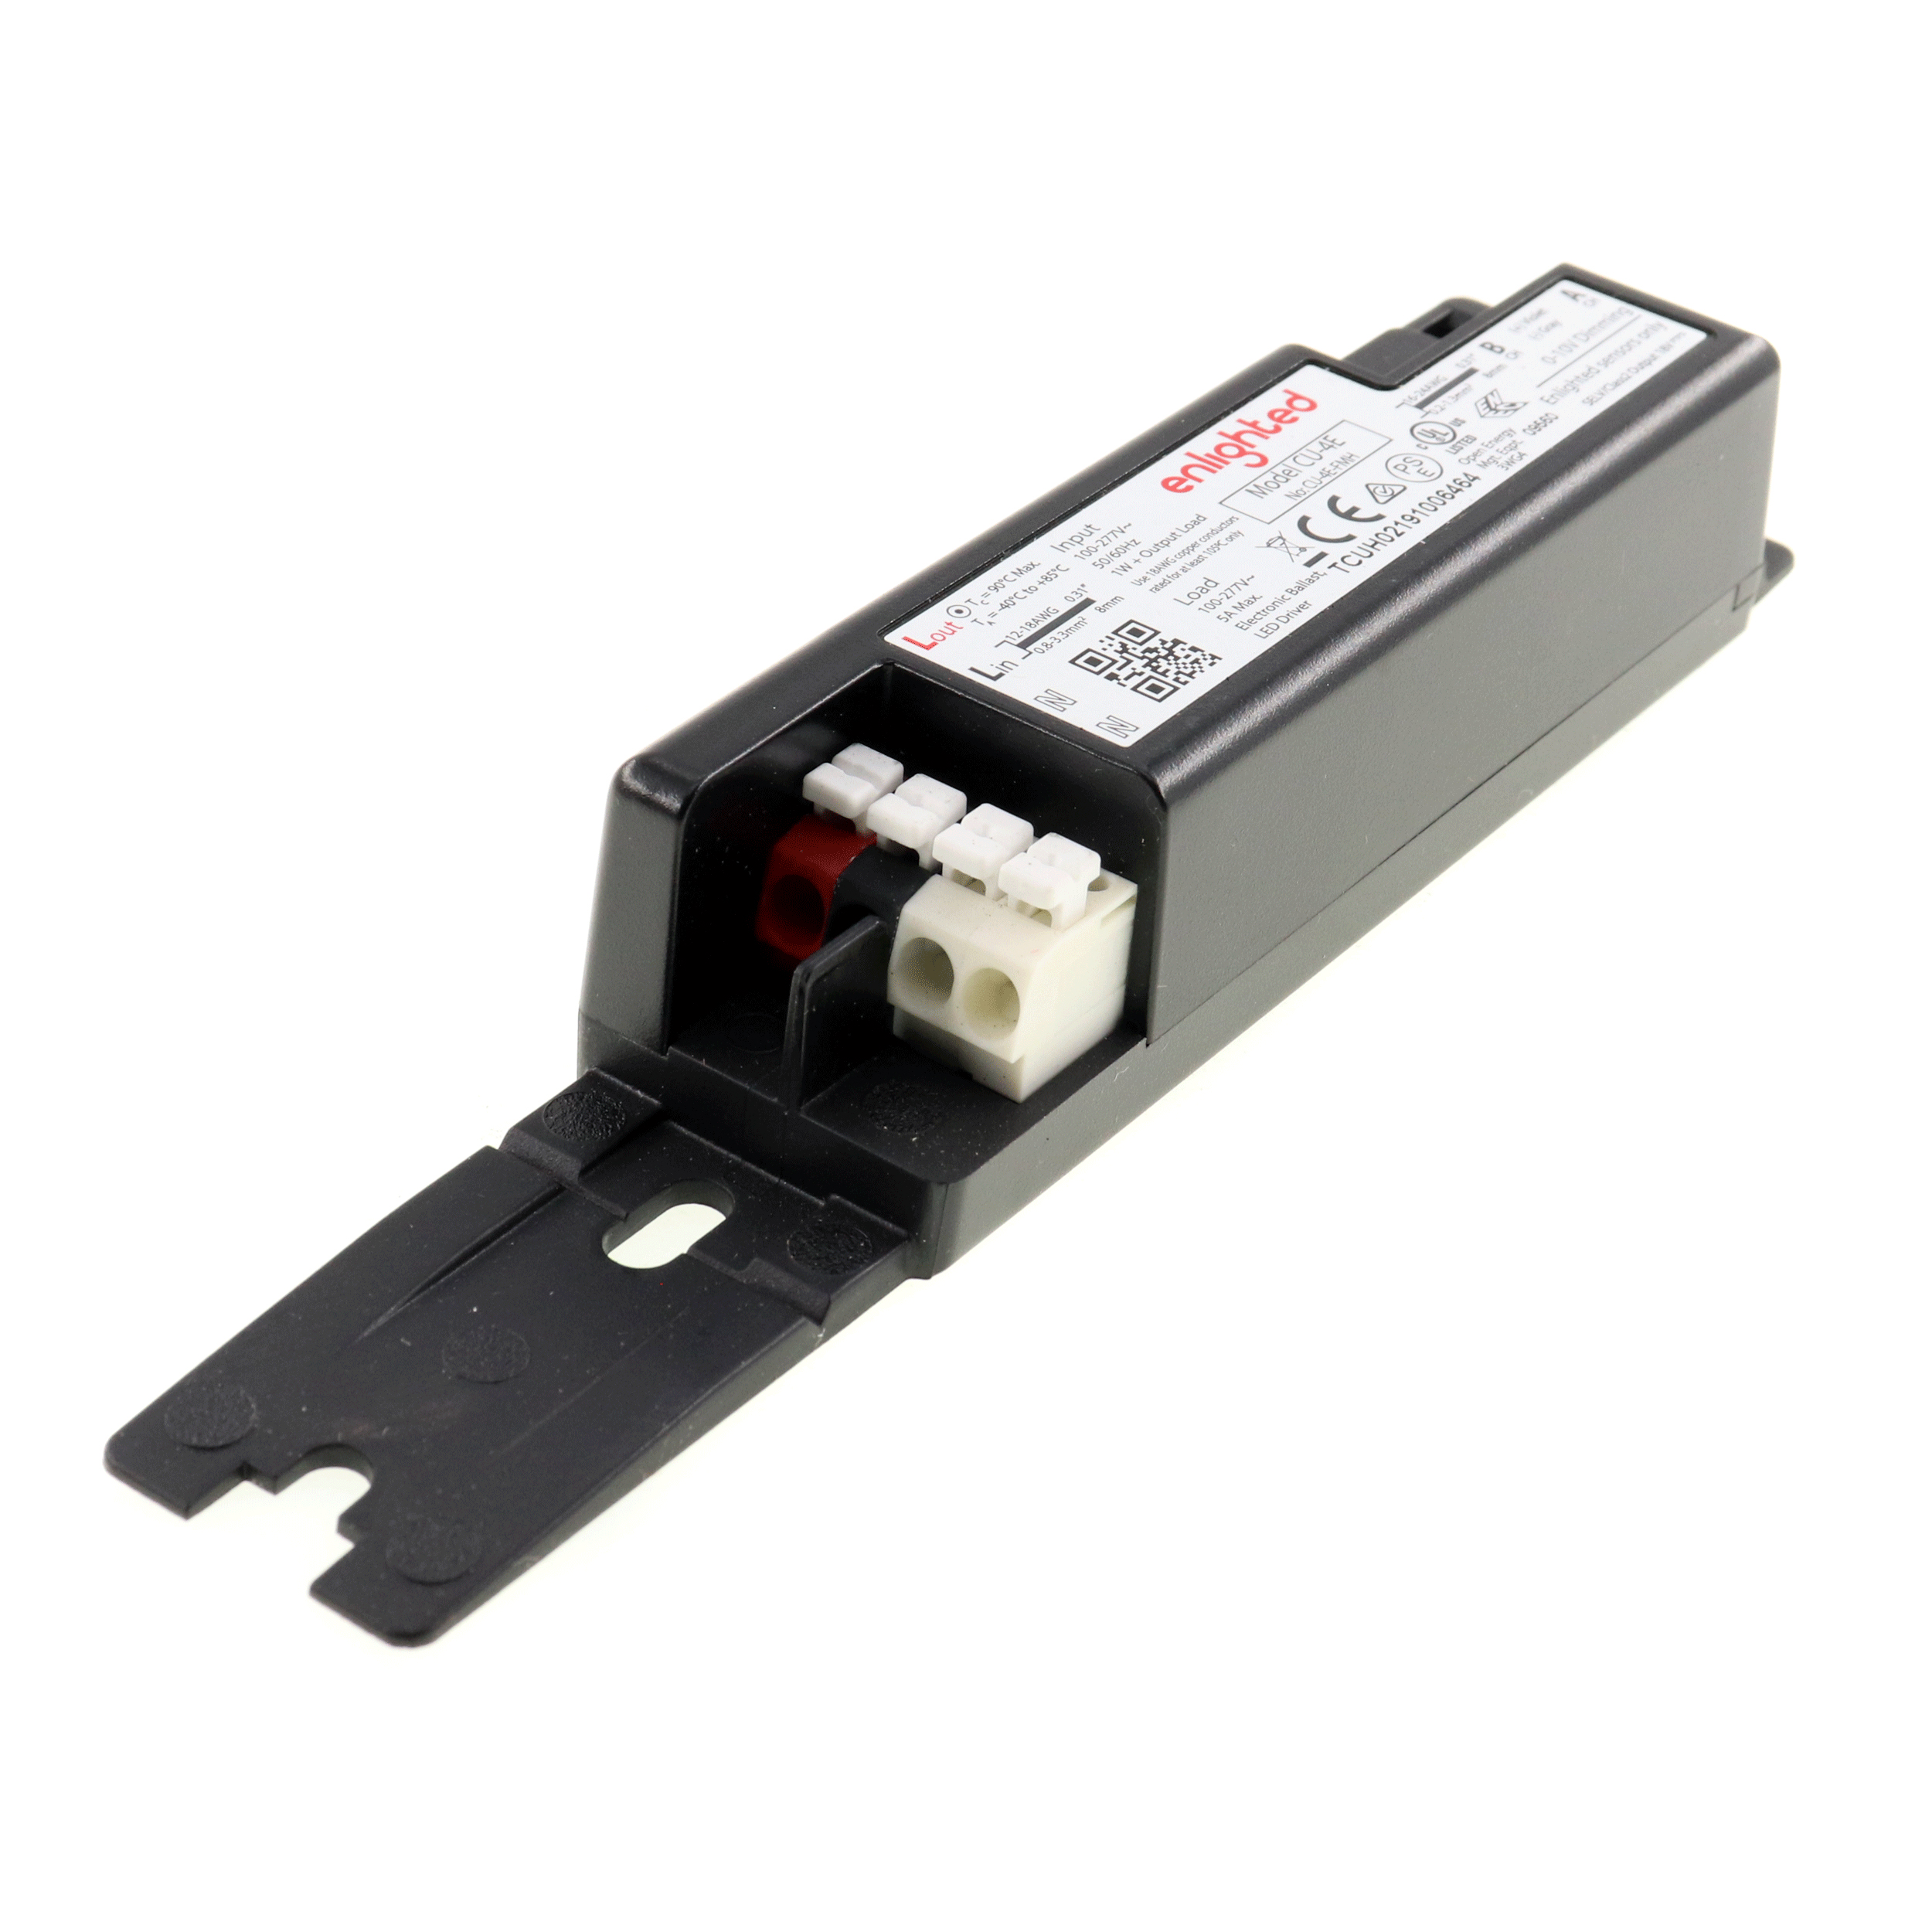 Enlighted CU-4E-FMH Fixture Mount Control Module, Dimming 0-10V, 5A, 100-277V - image 2 of 4